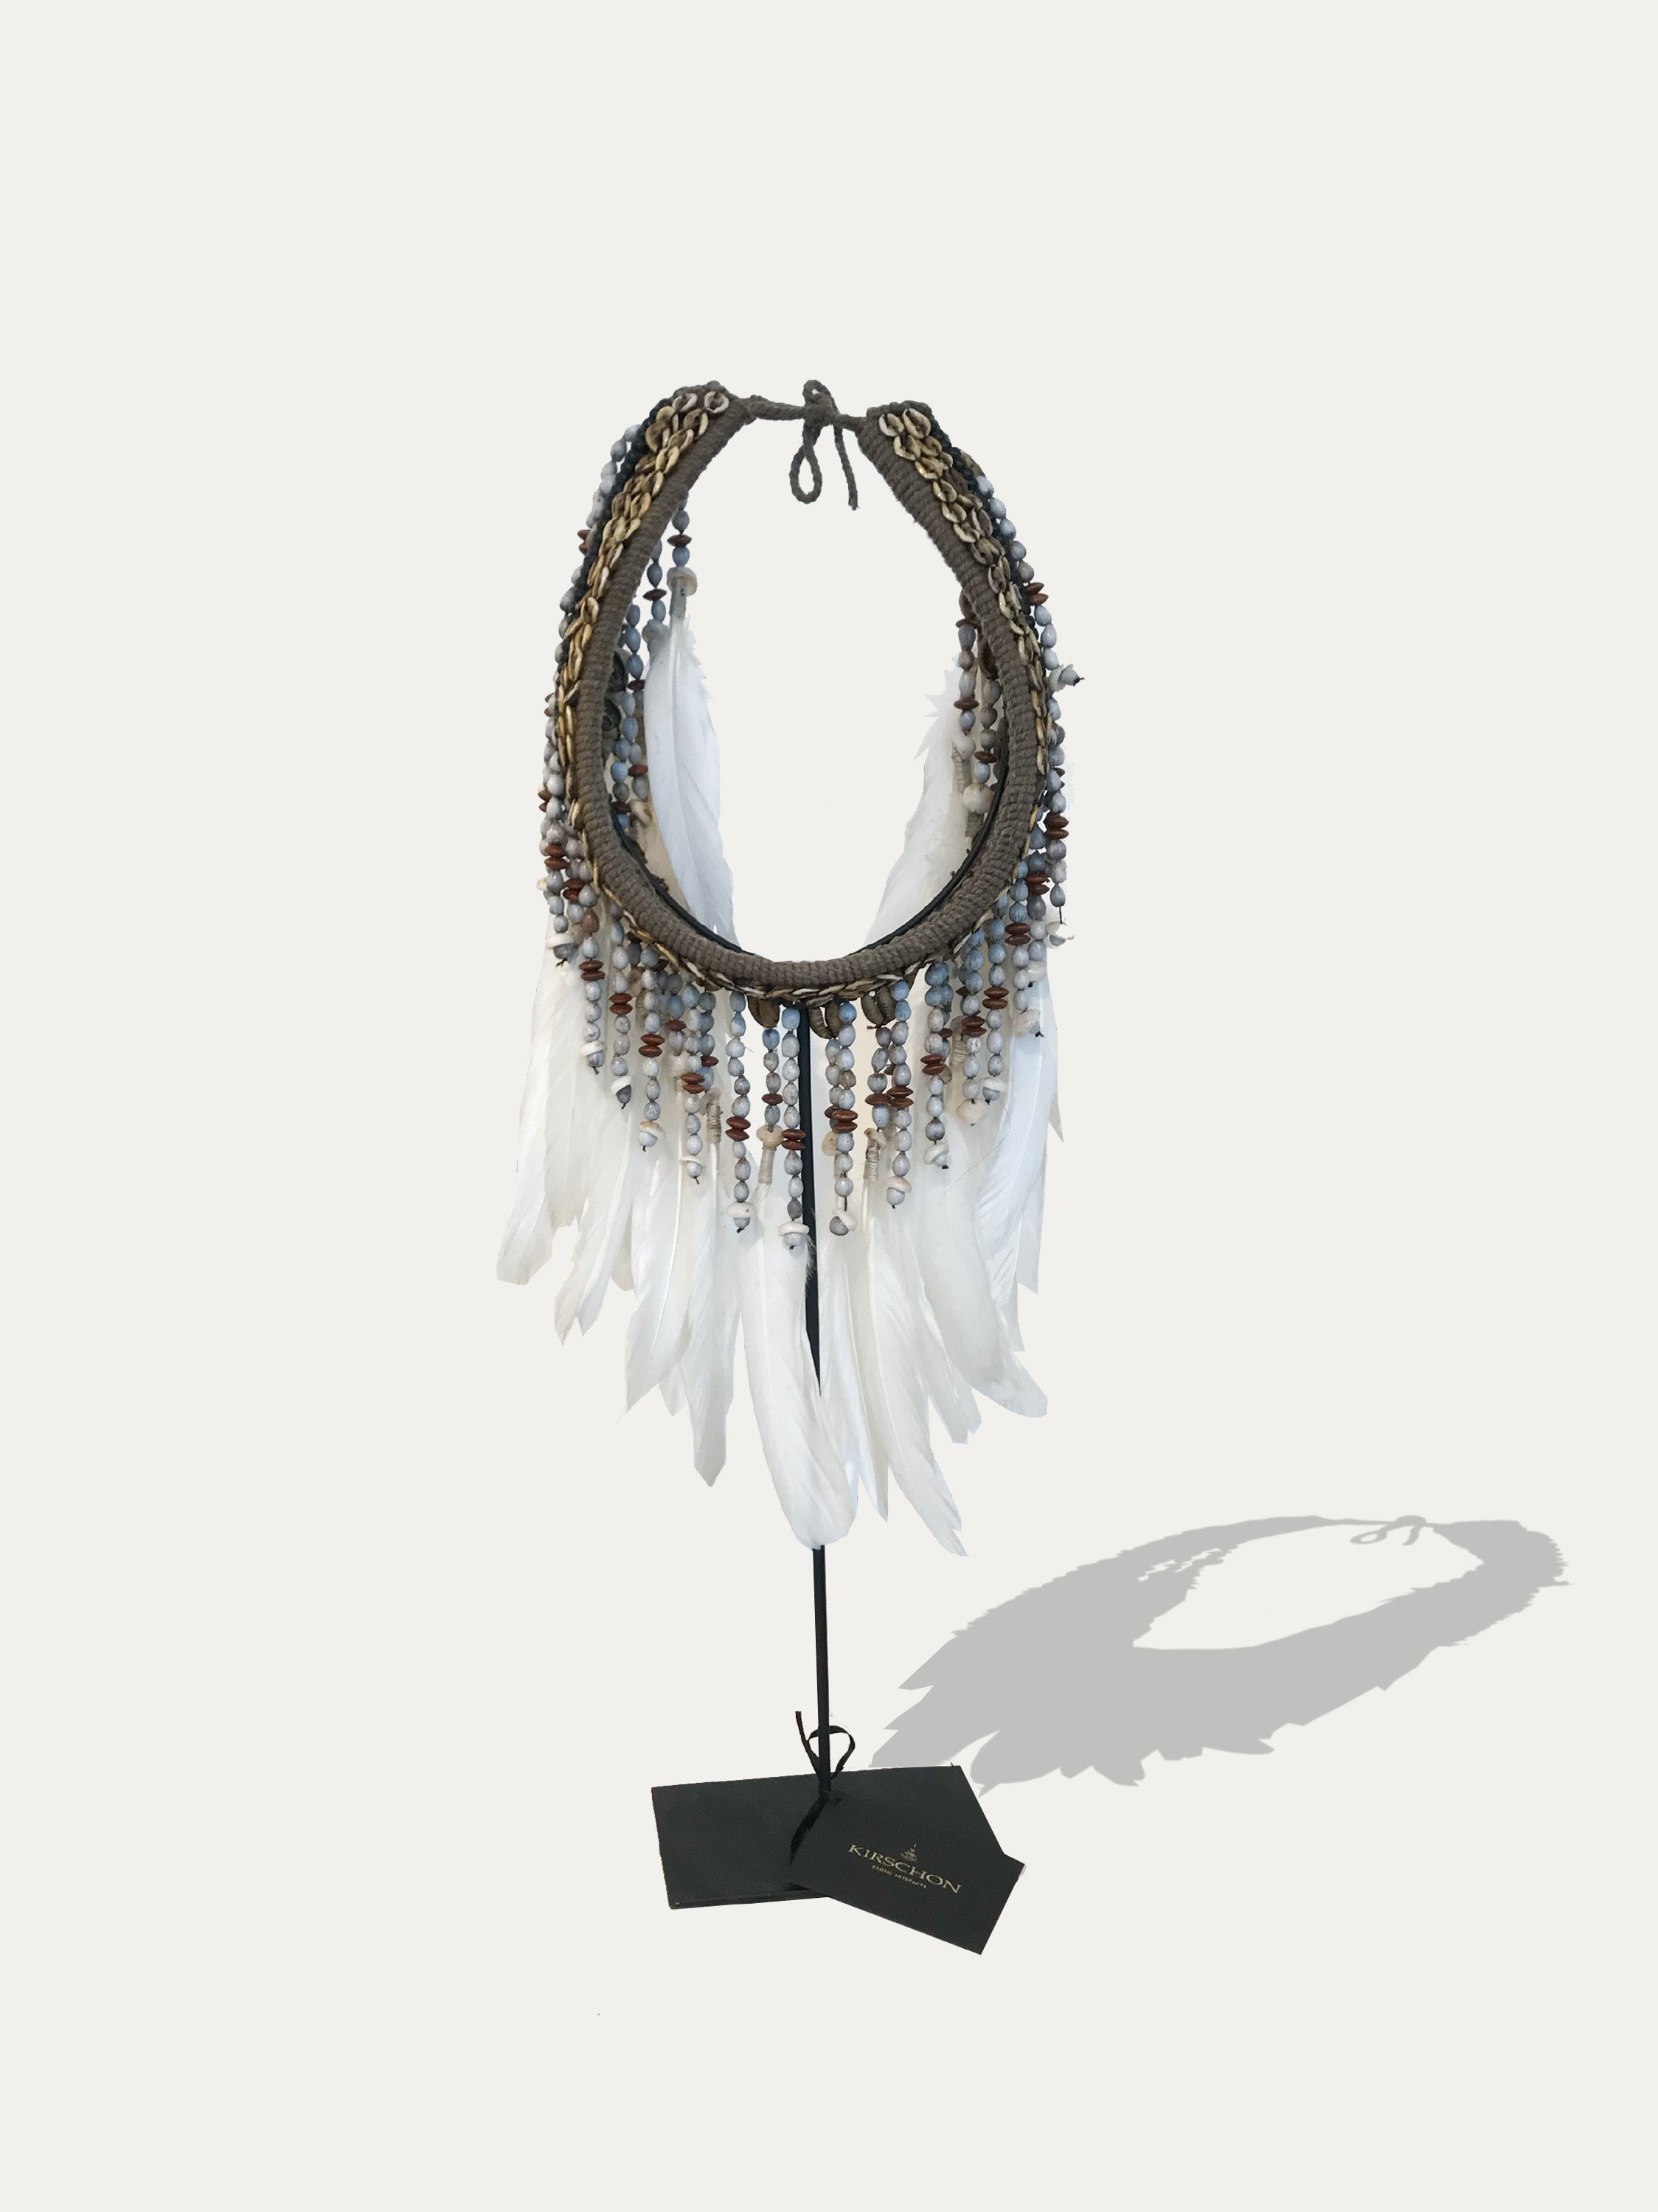 Feather Necklace from Papua